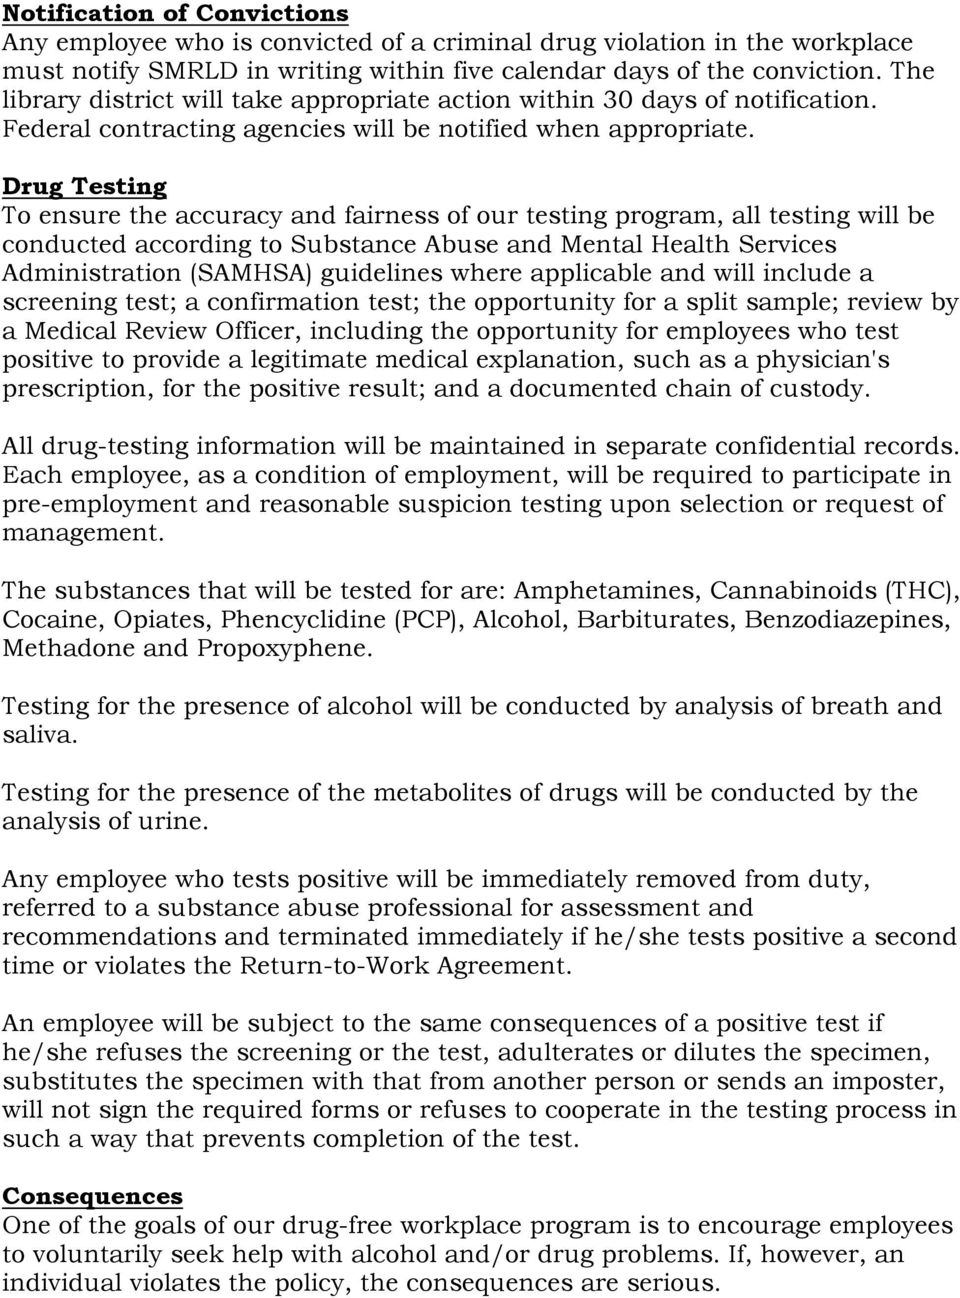 Drug Testing To ensure the accuracy and fairness of our testing program, all testing will be conducted according to Substance Abuse and Mental Health Services Administration (SAMHSA) guidelines where